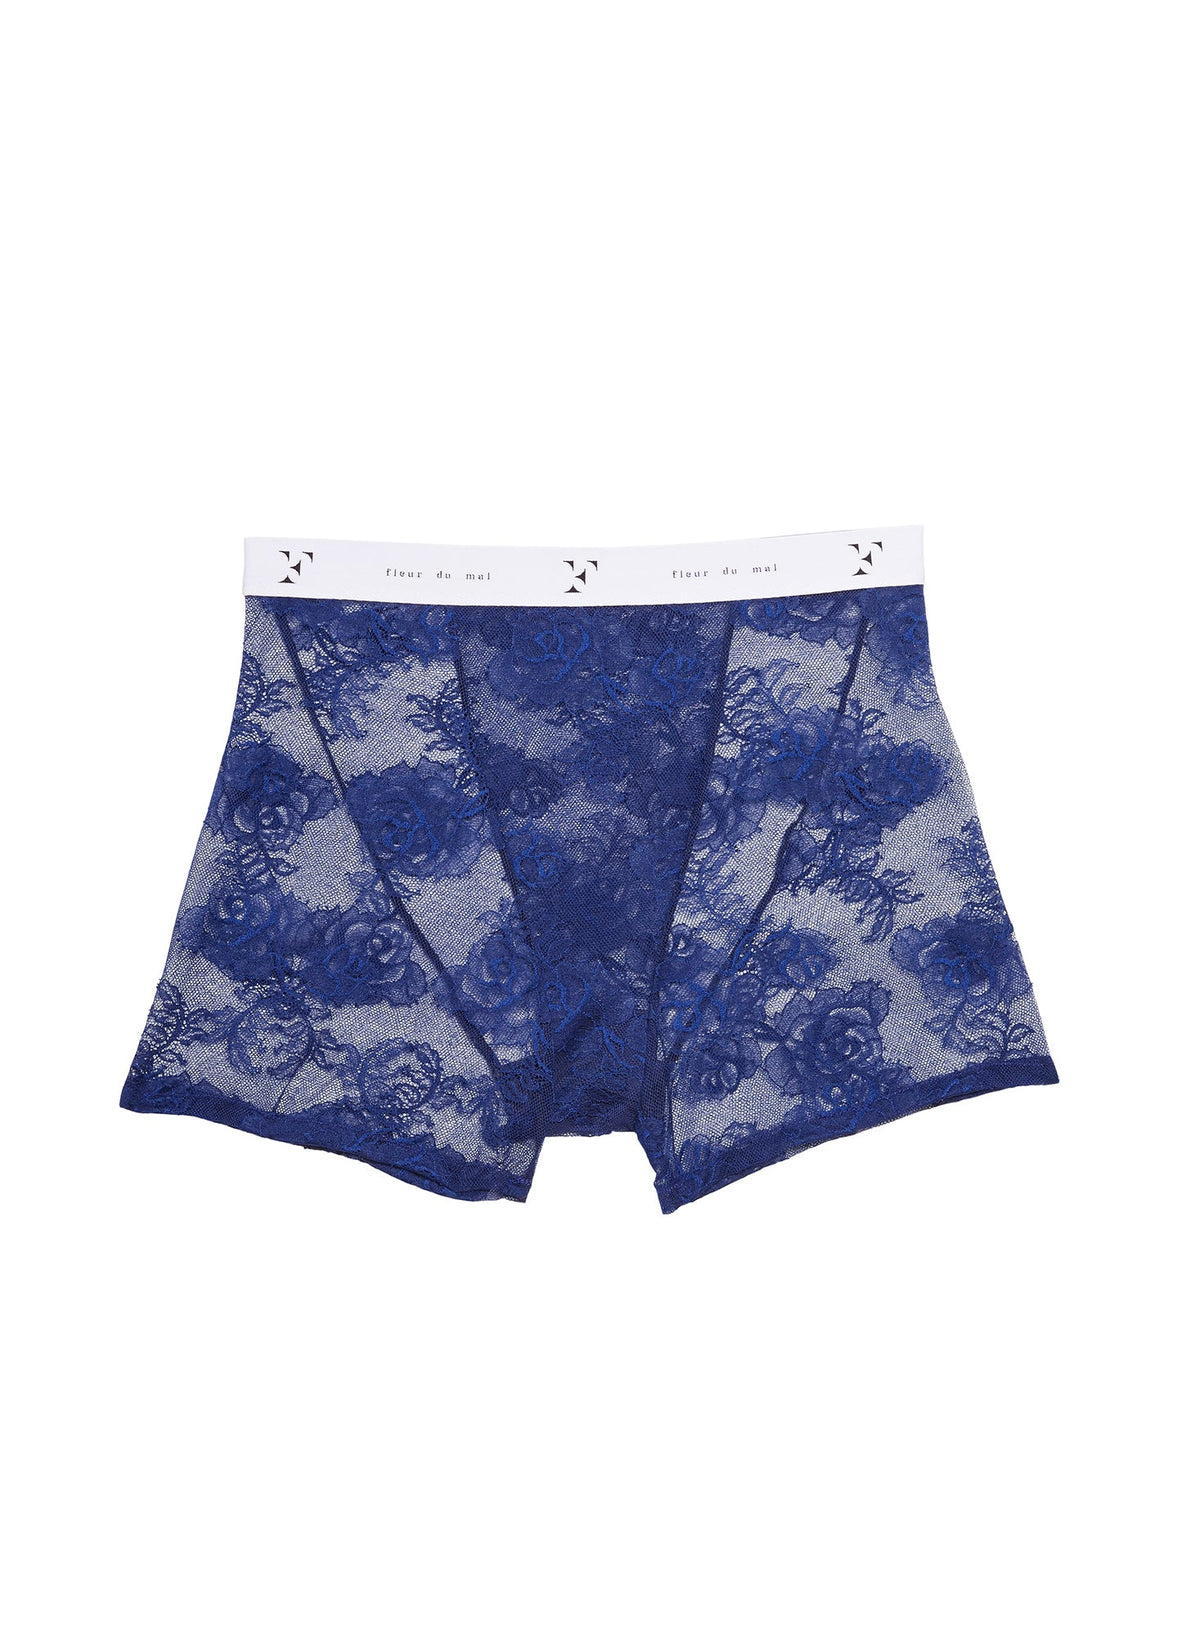 Bouquet Lace Boxer Brief in Midnight Navy